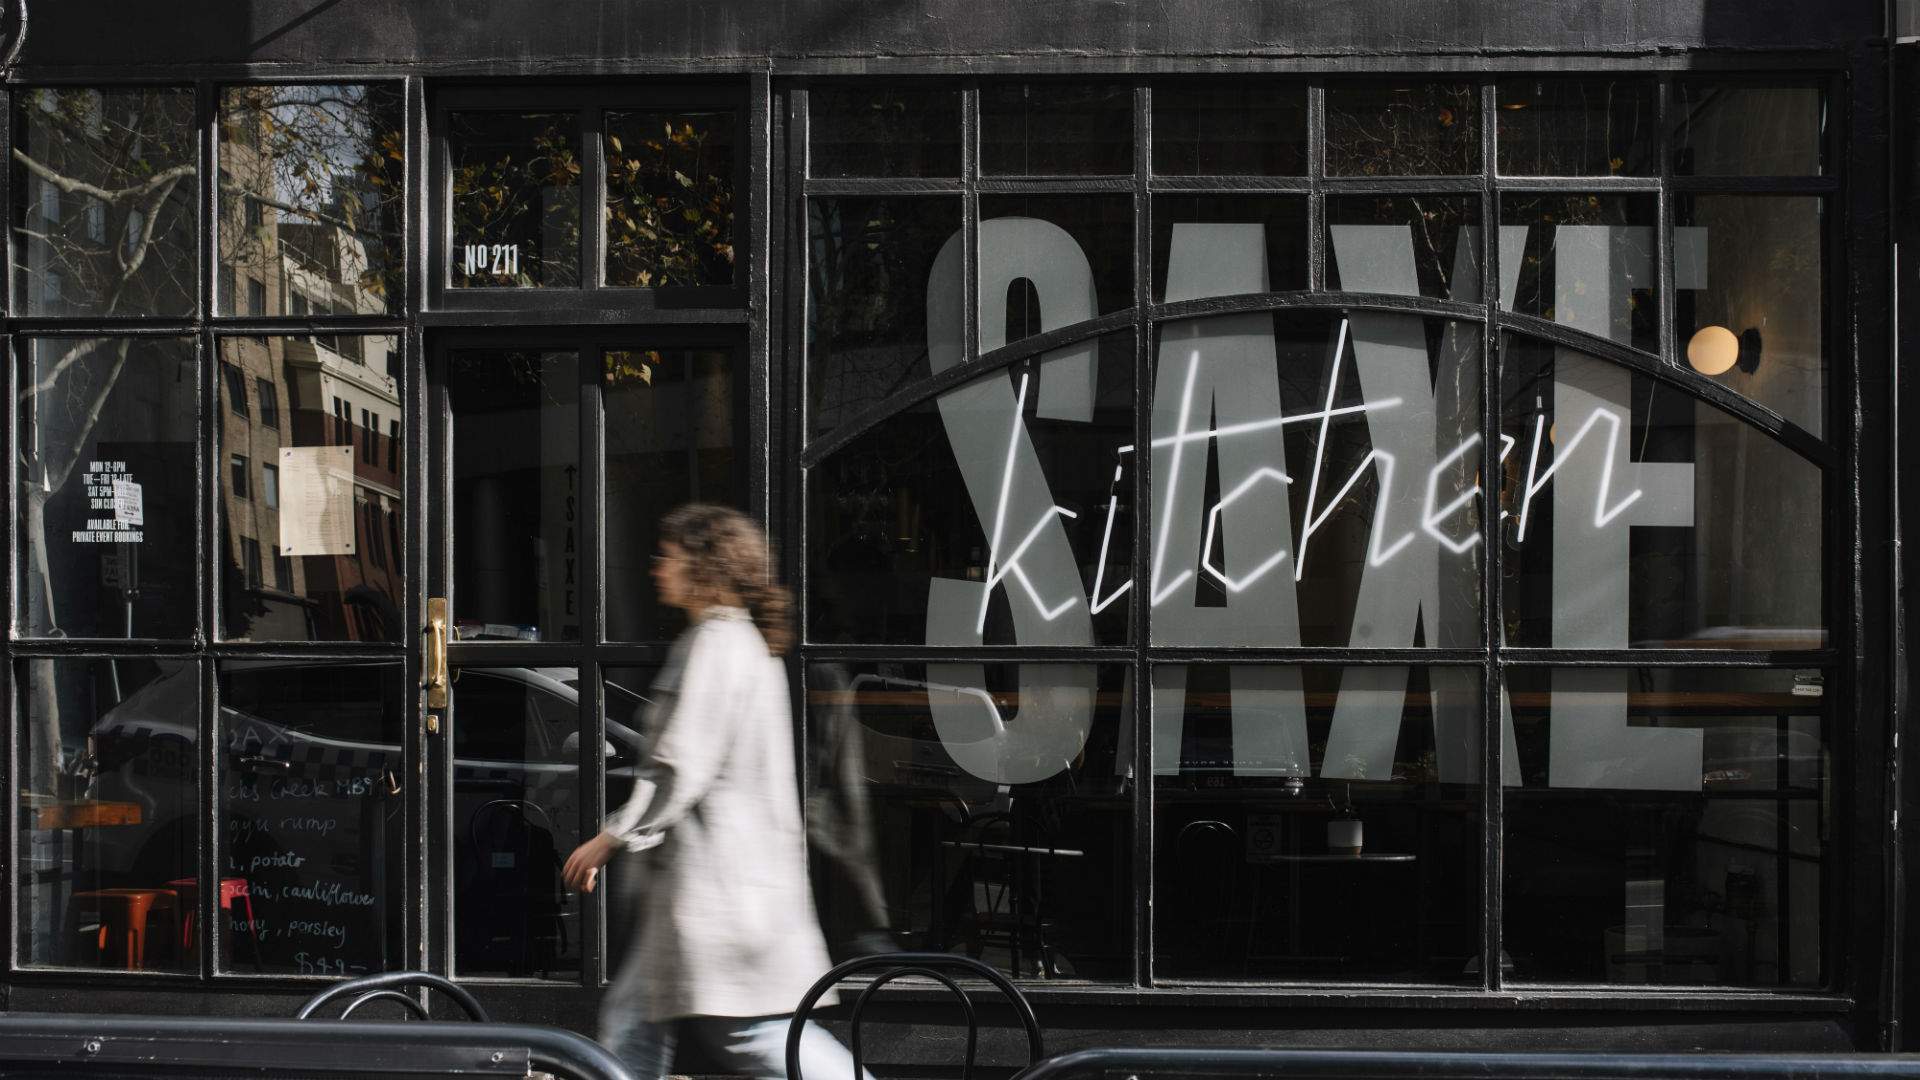 The CBD's Acclaimed Saxe Now Has a Second, Cheaper Restaurant Underneath It